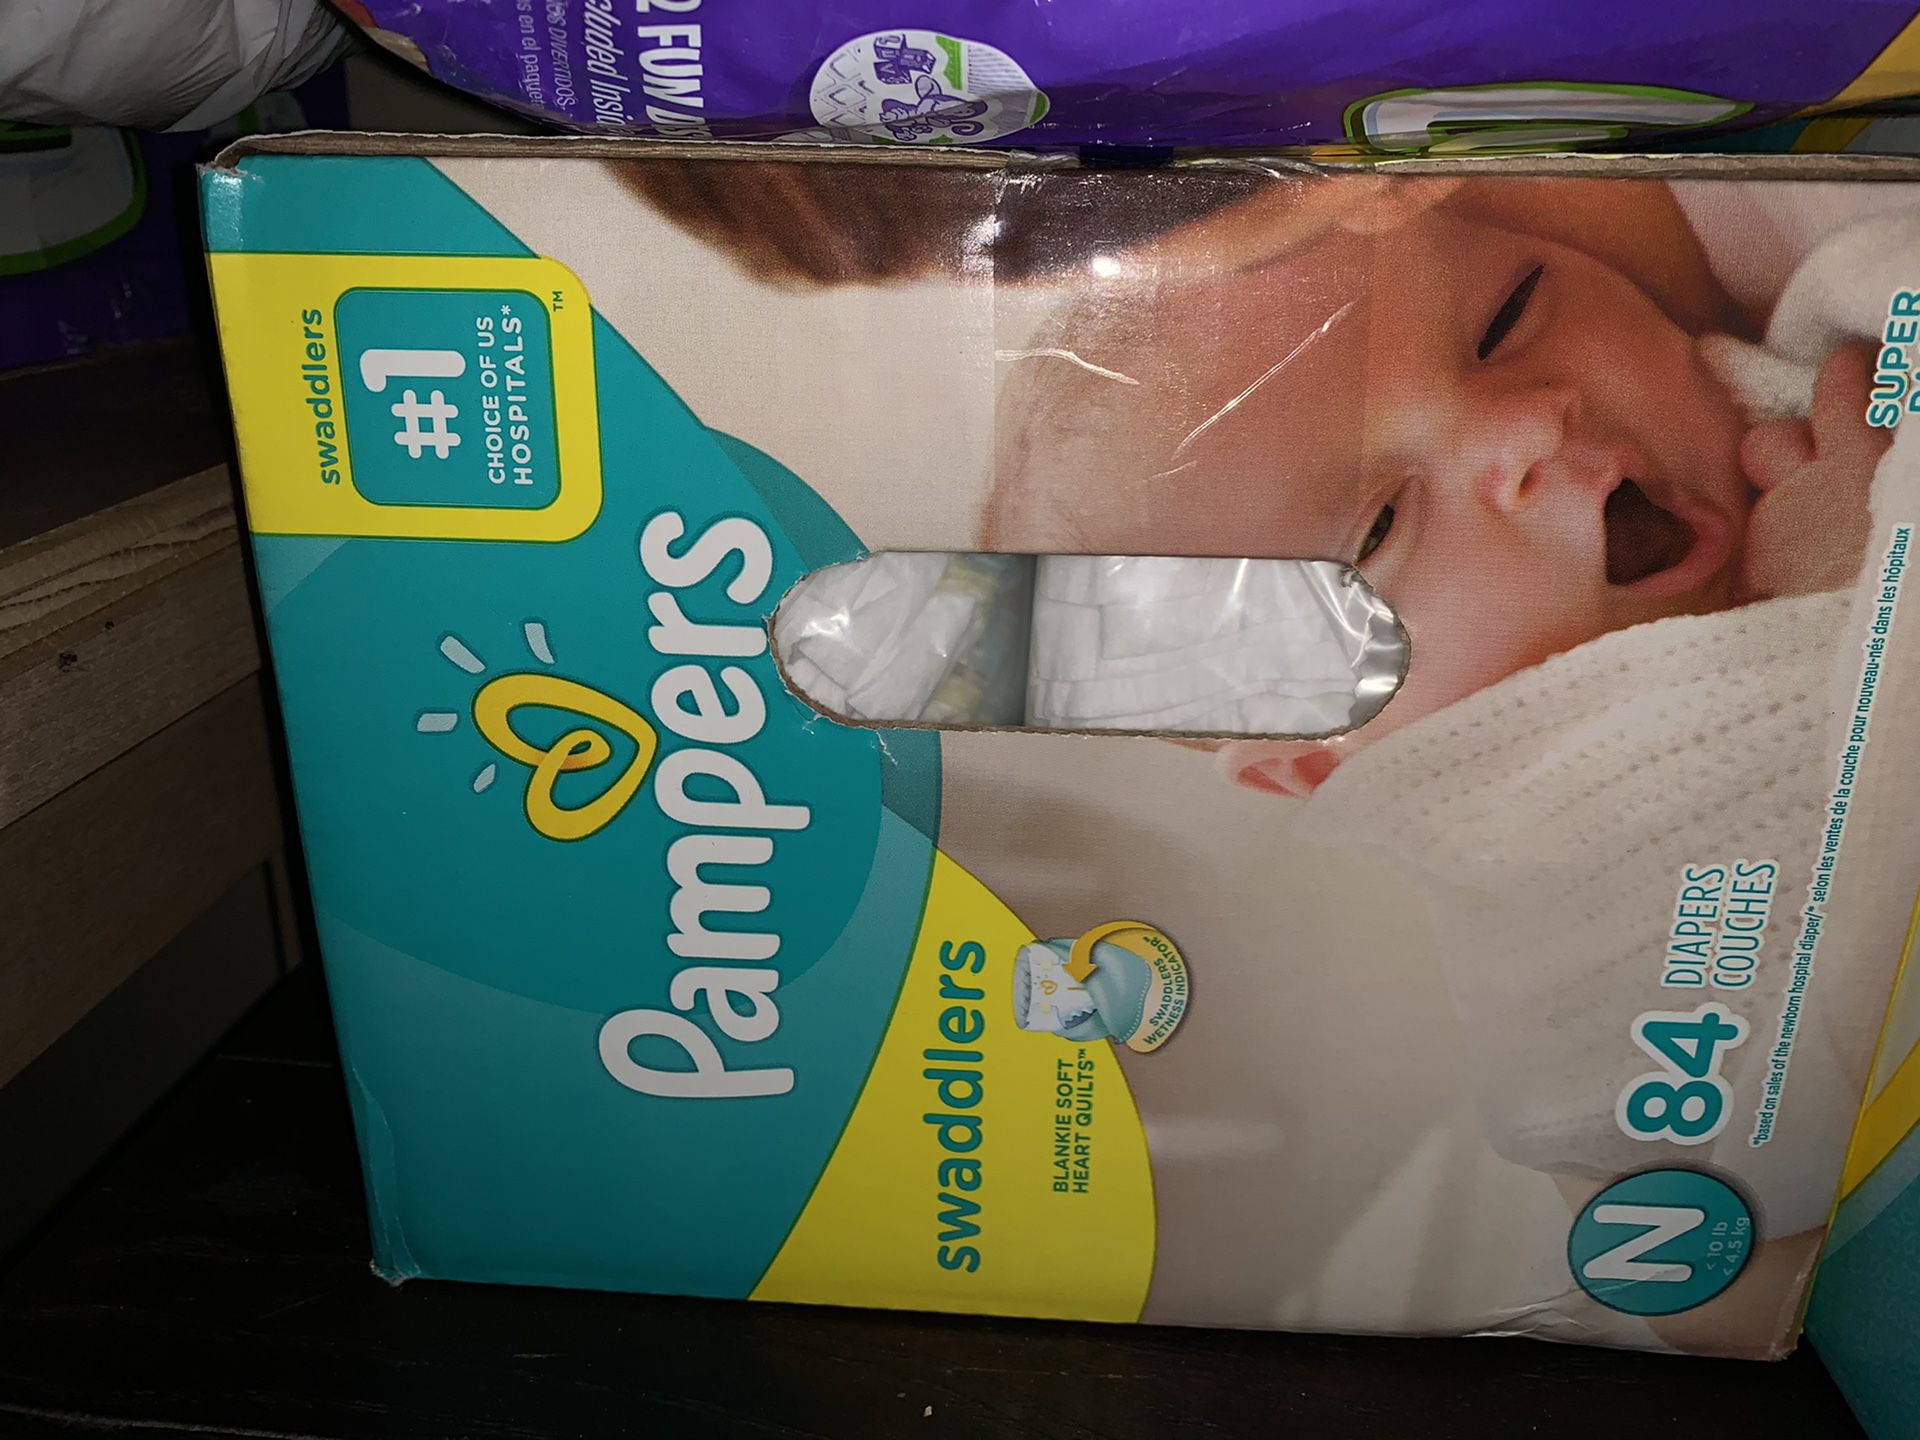 Pampers Swaddlers Newborn diapers 84 pack. Brand new box